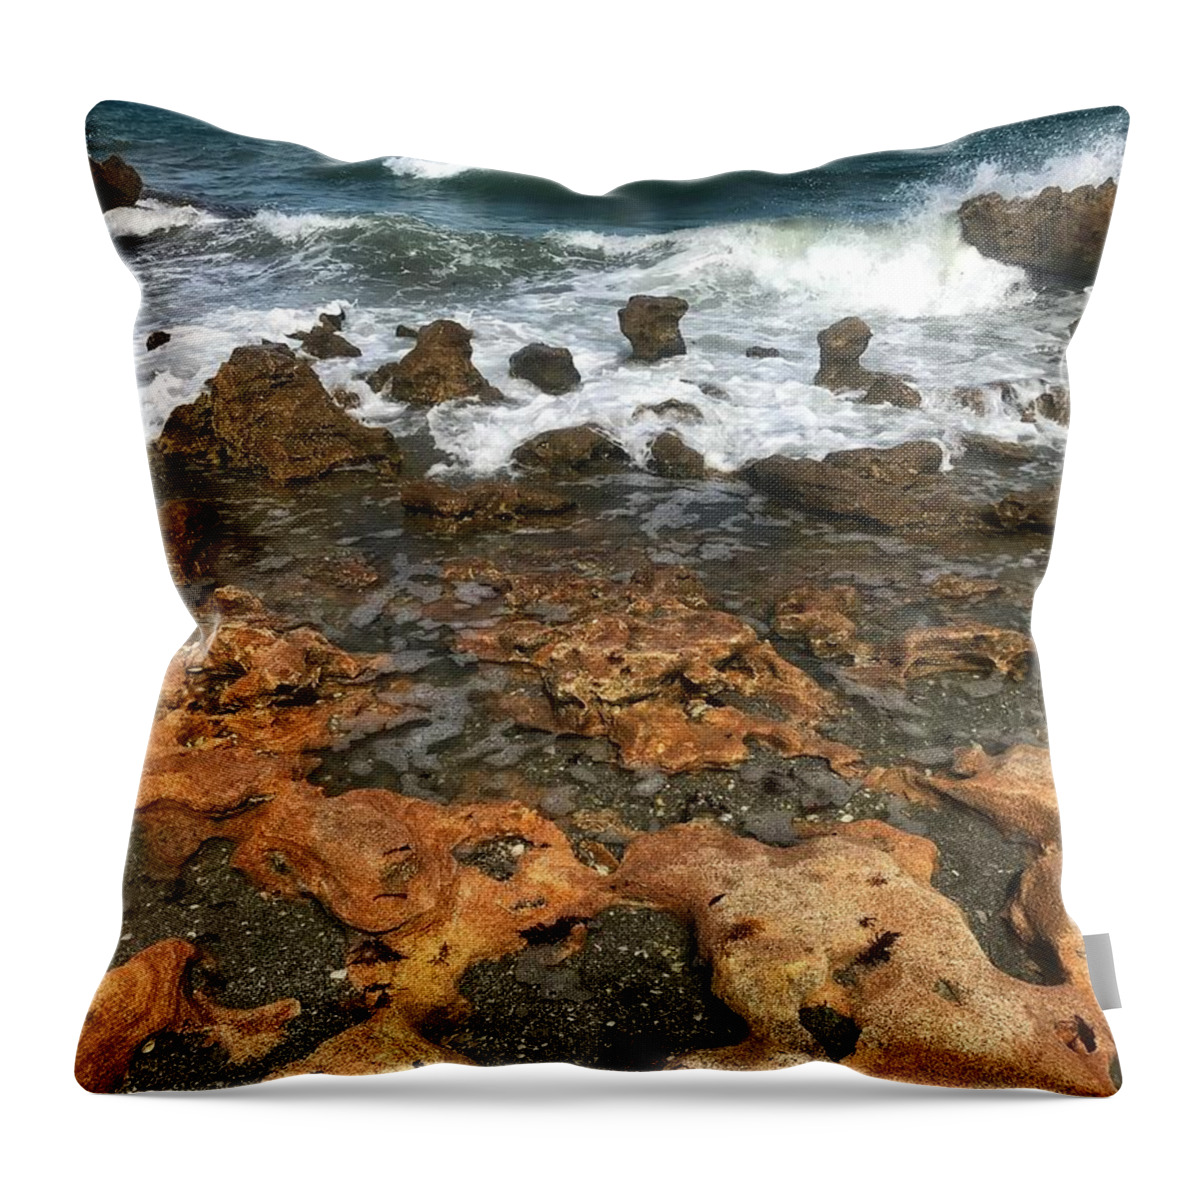 Landscape Throw Pillow featuring the photograph Coral Beach by Vicki Lewis